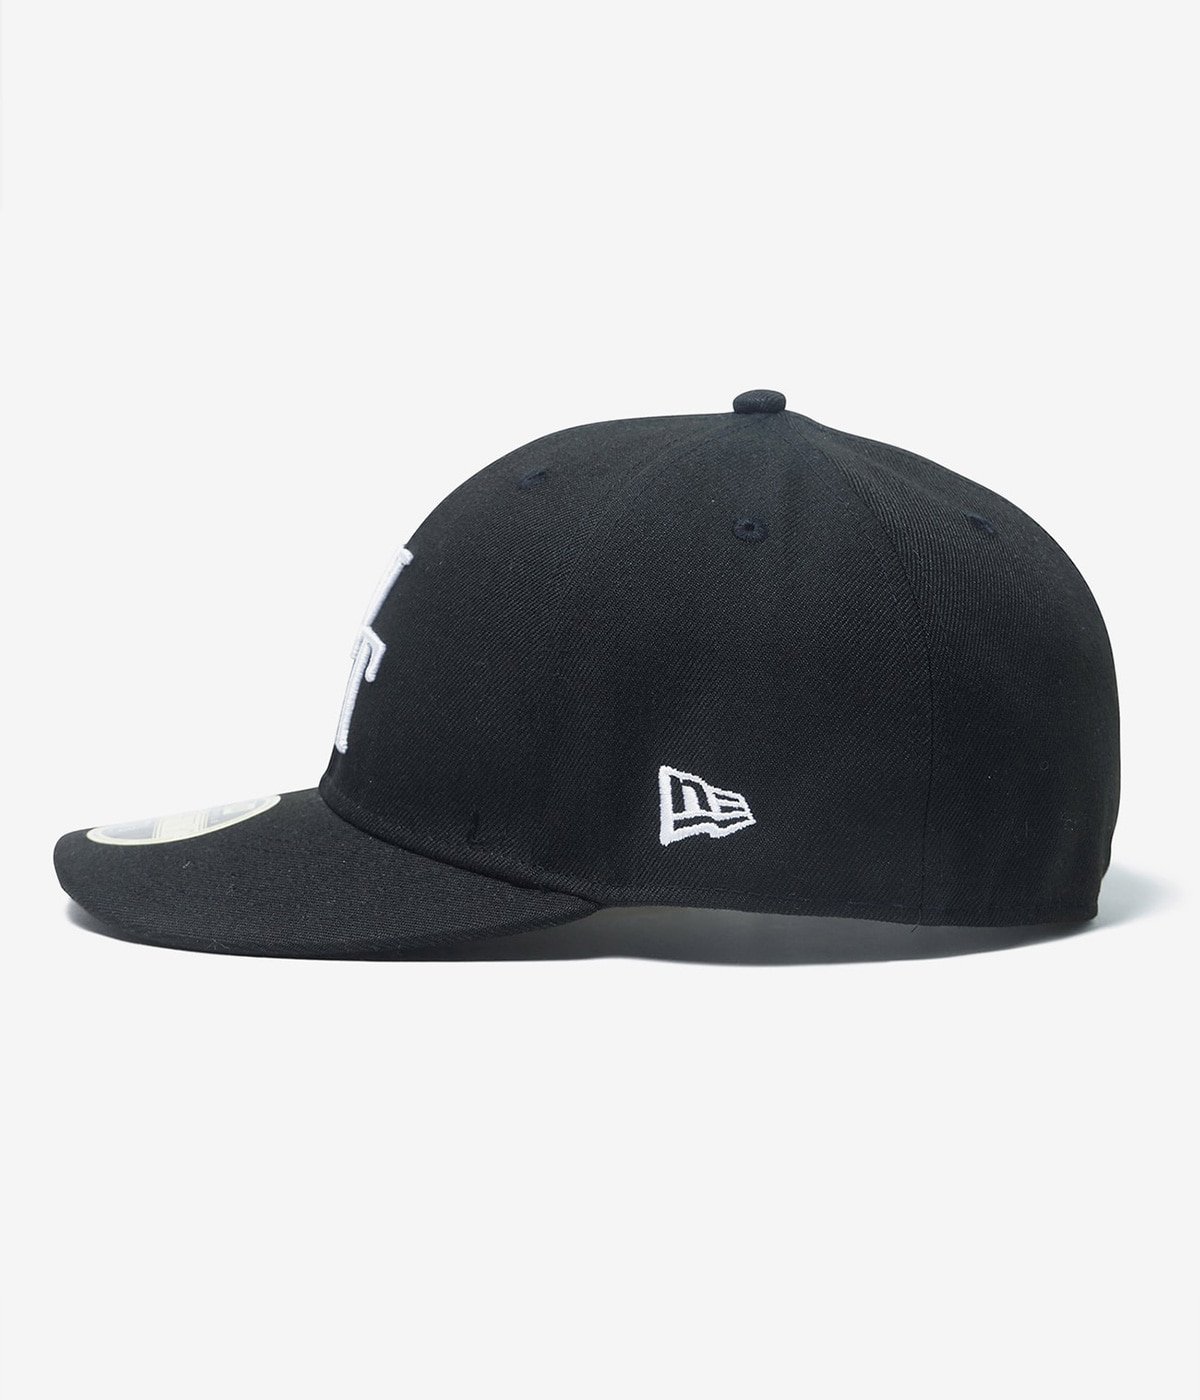 59FIFTY LOW PROFILE / CAP / POLY. TWILL. NEWERA